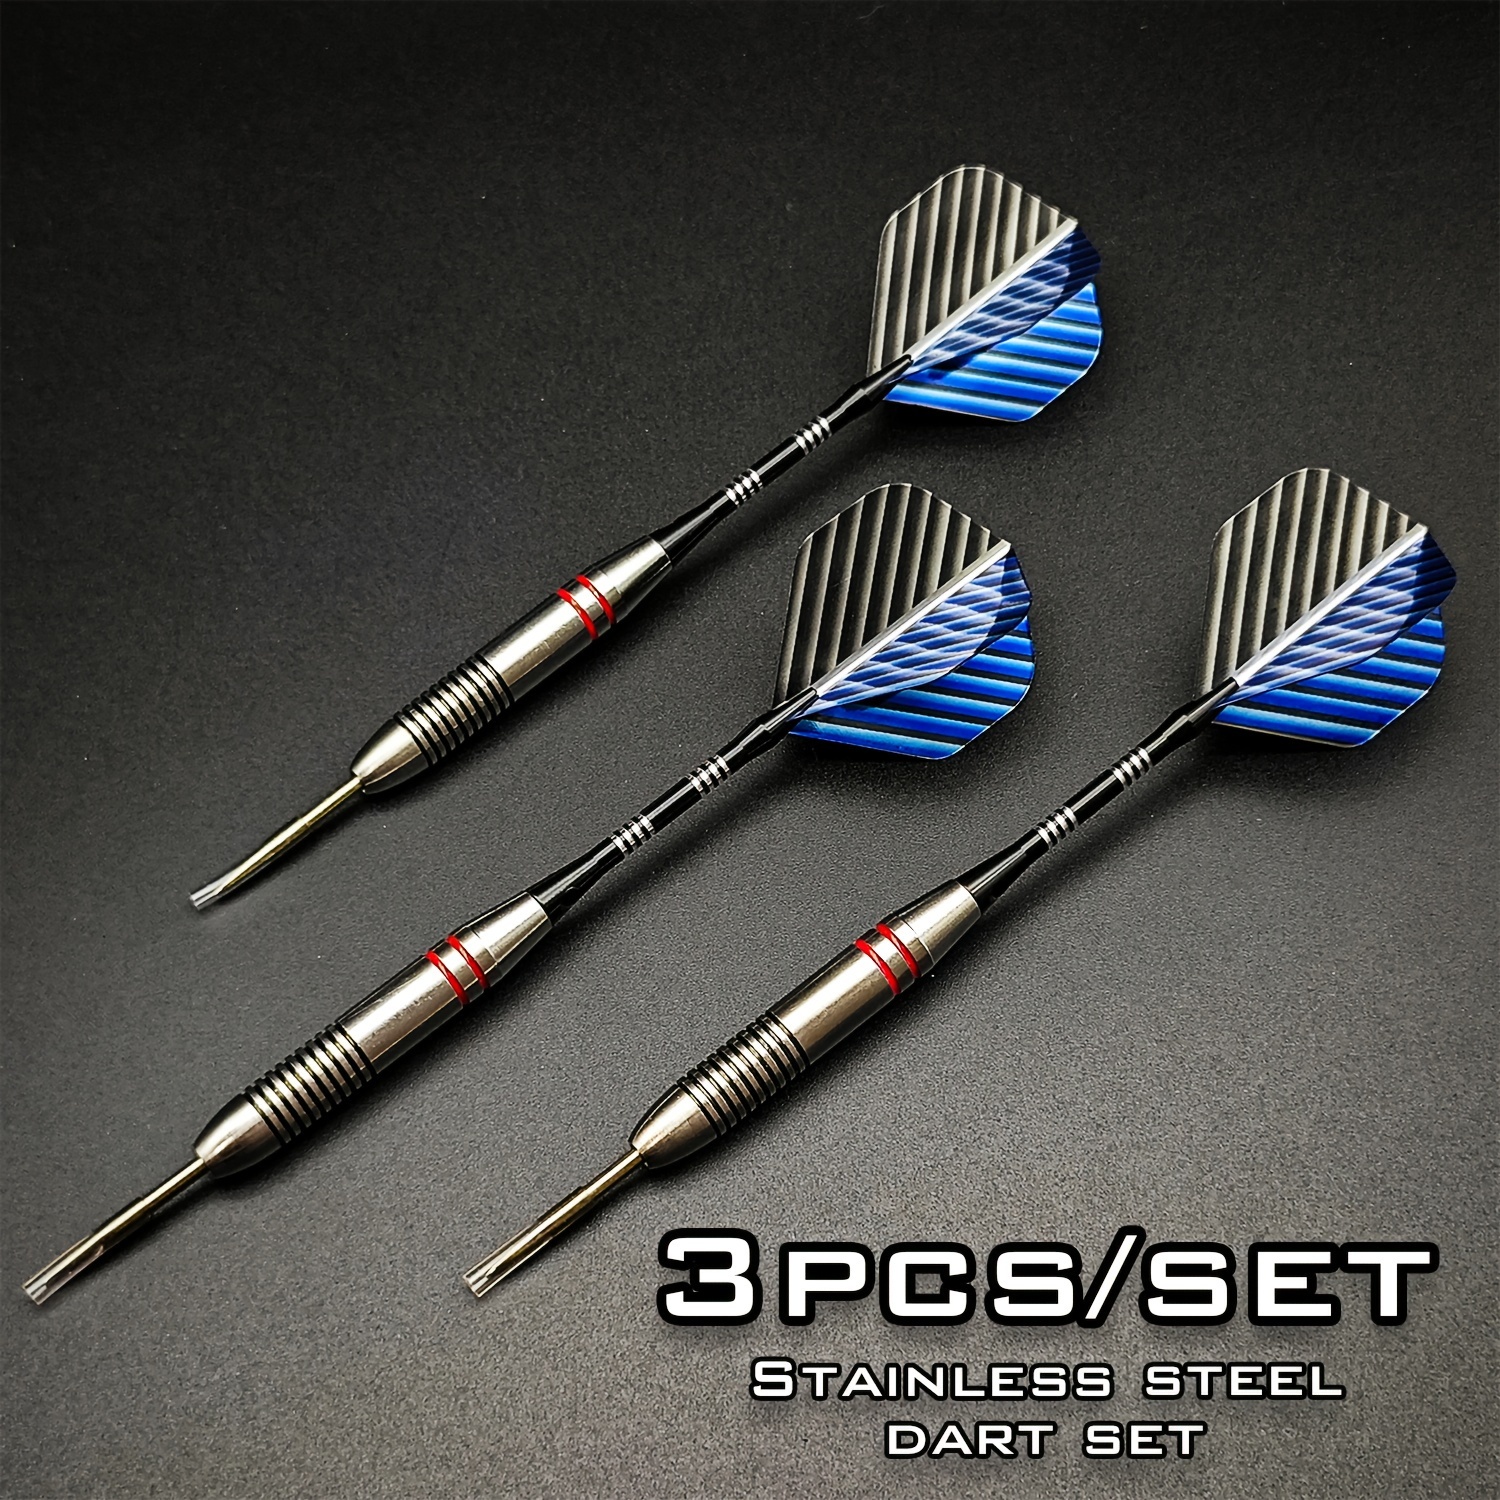 

24g Professional Dart Set, 3 Pcs Stainless Steel Tip Darts, Universal Fit For Training And Competition, Sturdy And Durable Design For Players Age 14 And Up